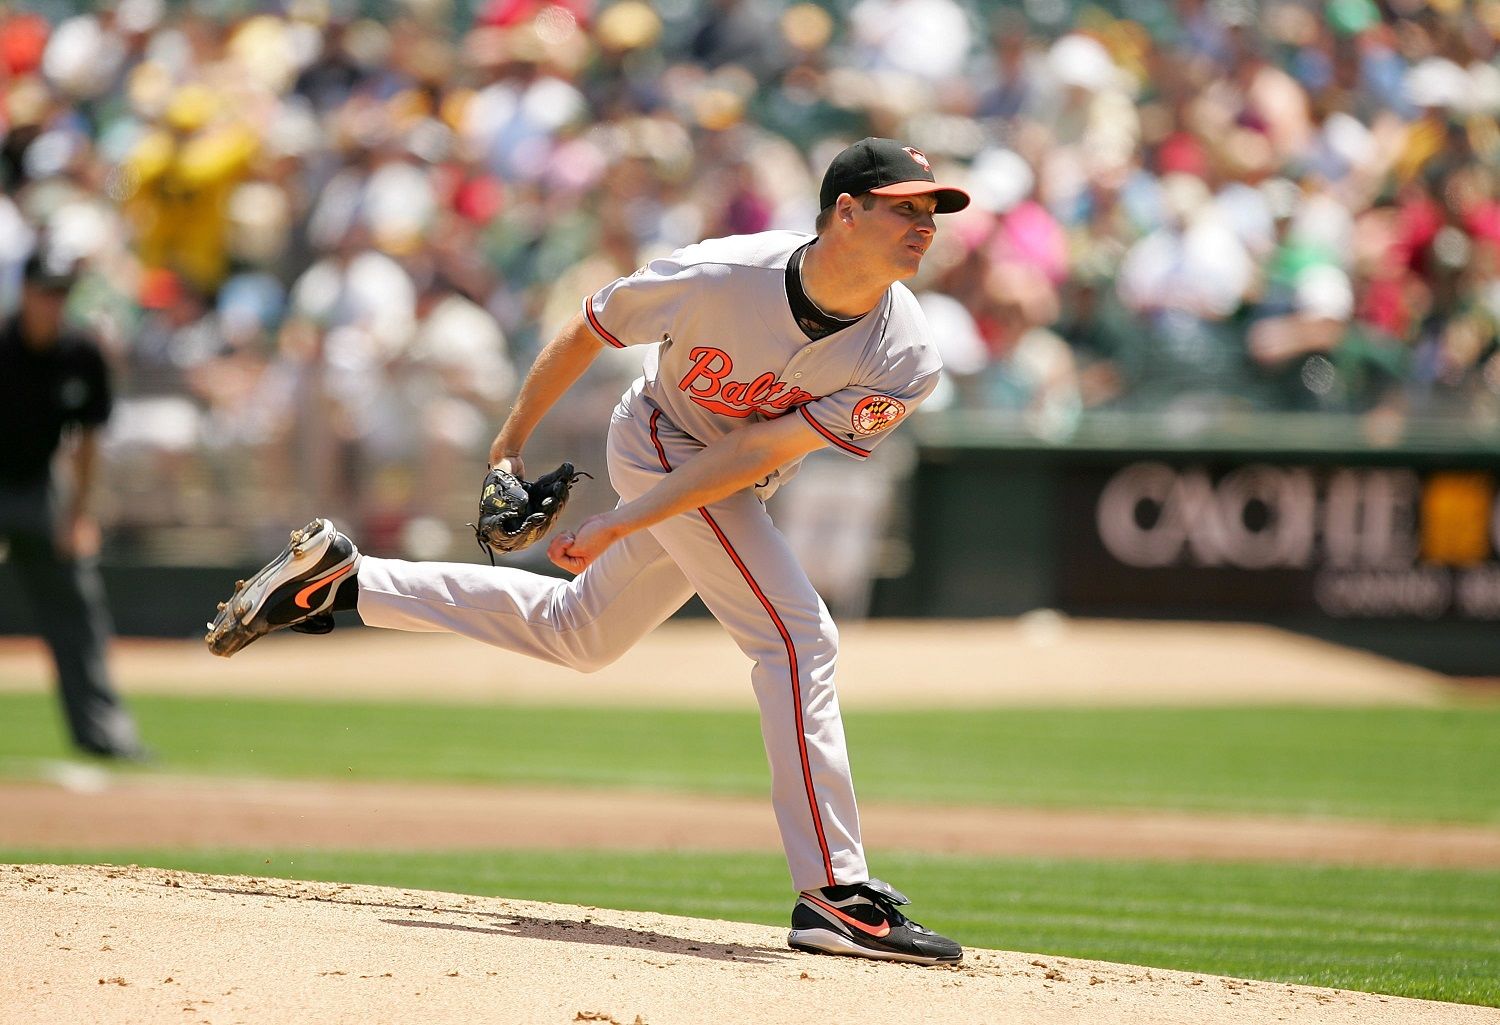 OAKLAND, CA - JUNE 07:  Rich Hill #51 of the Baltimore Orioles pitches against the Oakland Athletics at the Oakland Coliseum on June 7, 2009 in Oakland, California.  (Photo by Ezra Shaw/Getty Images)